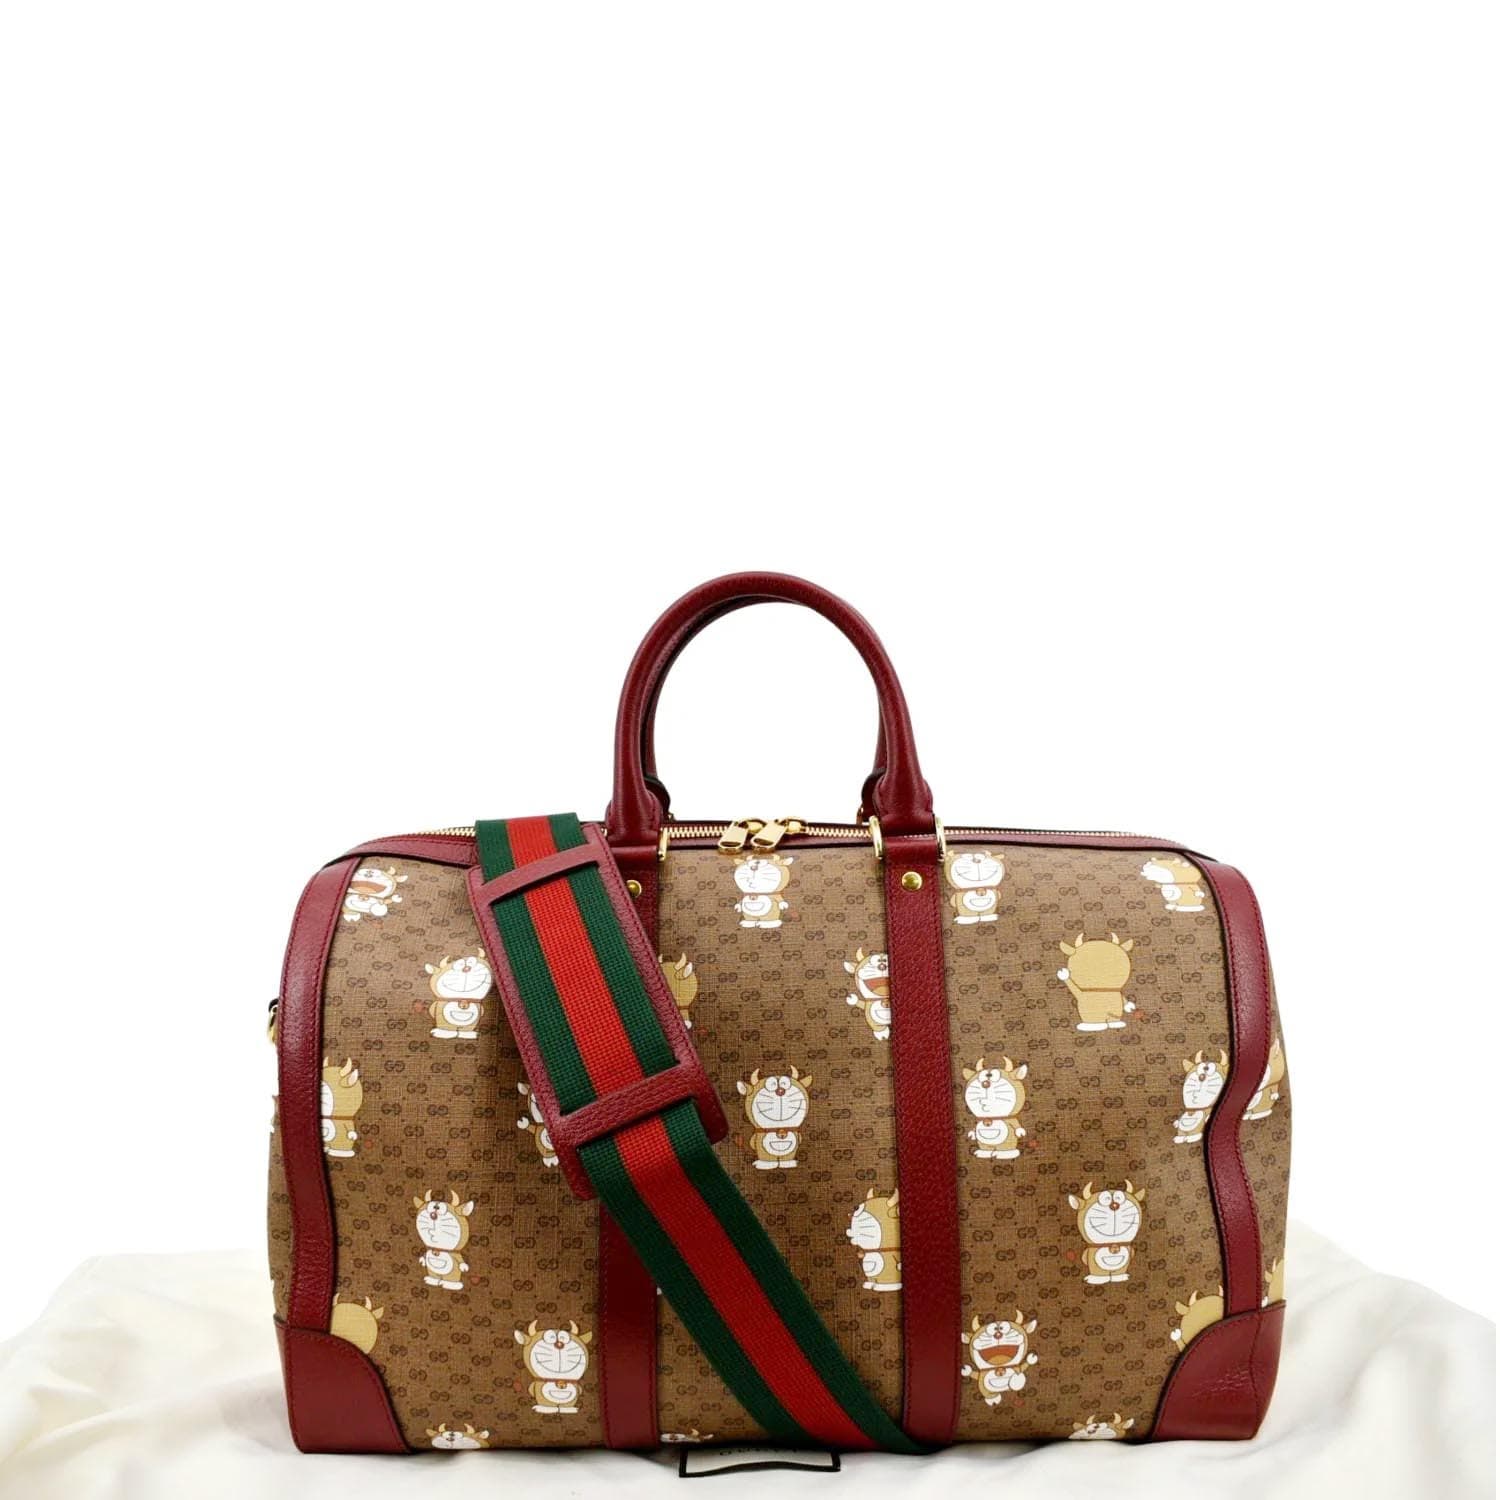 Gucci Large GG Supreme Canvas Duffle Bag in Brown